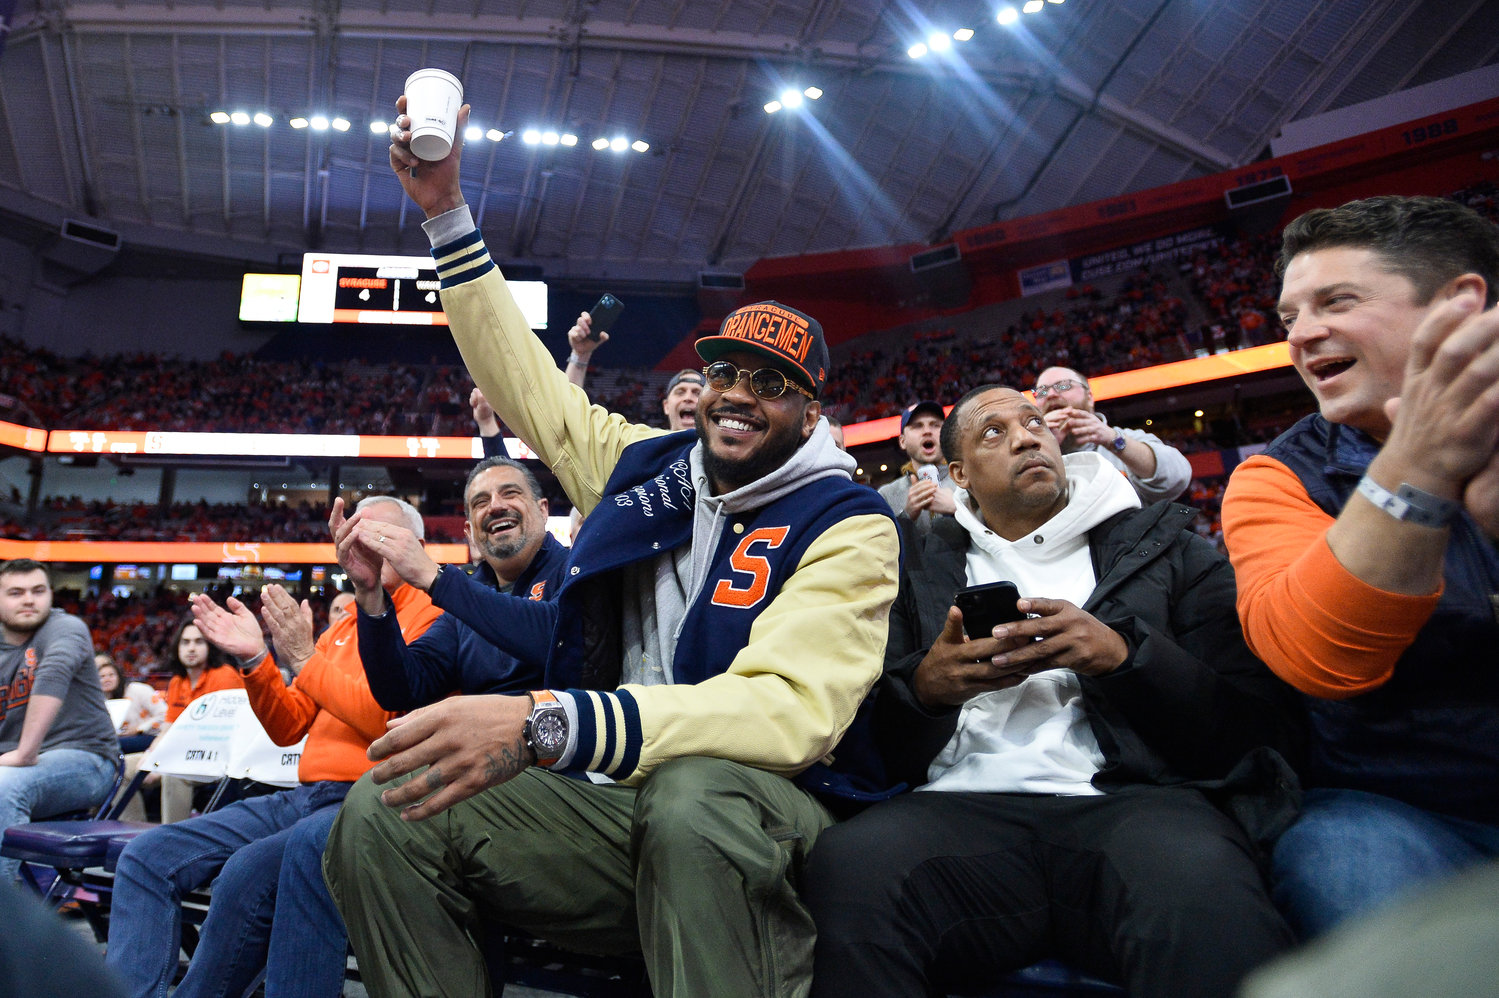 Carmelo Anthony waves to the crowd during the first half of Saturday's game between Syracuse and Wake Forest. Anthony and the 2003 national champion team was recognized at halftime.